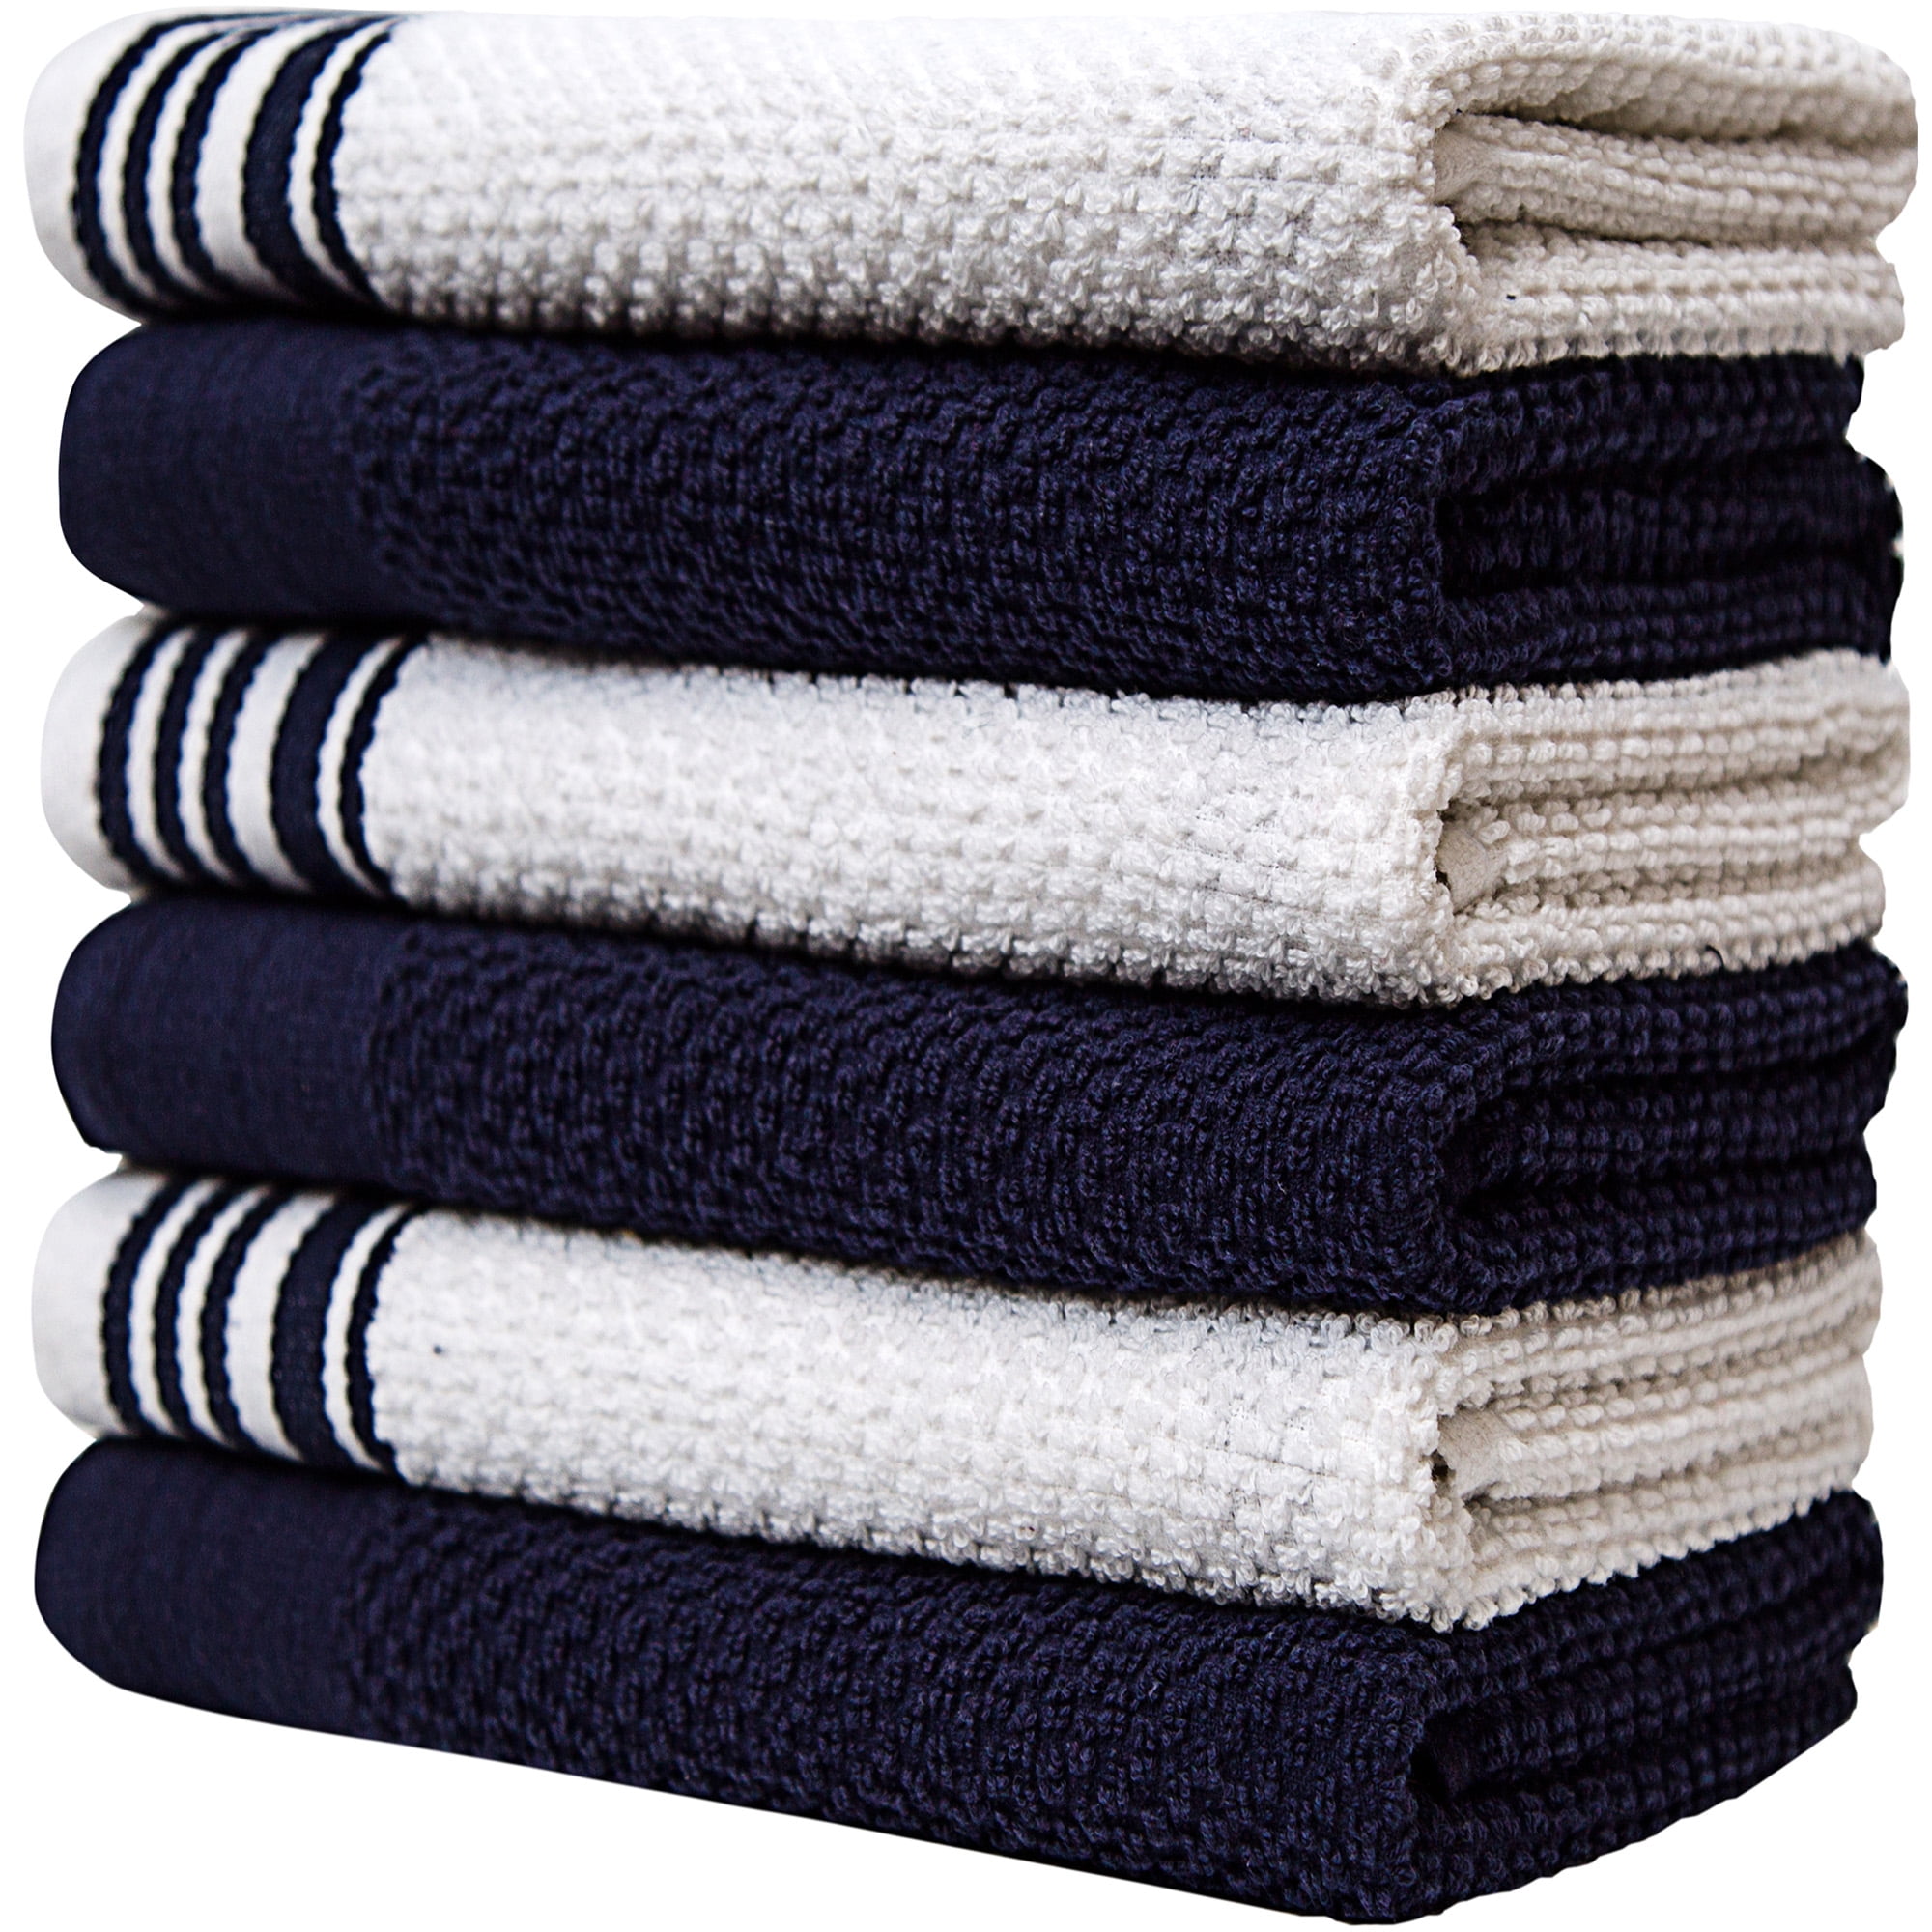 Premium Kitchen Towels (16x 28, 6 Pack) Large Cotton Kitchen Hand Towels Chef Weave Design 380 GSM Highly Absorbent Tea Towels Set with Hanging Loop